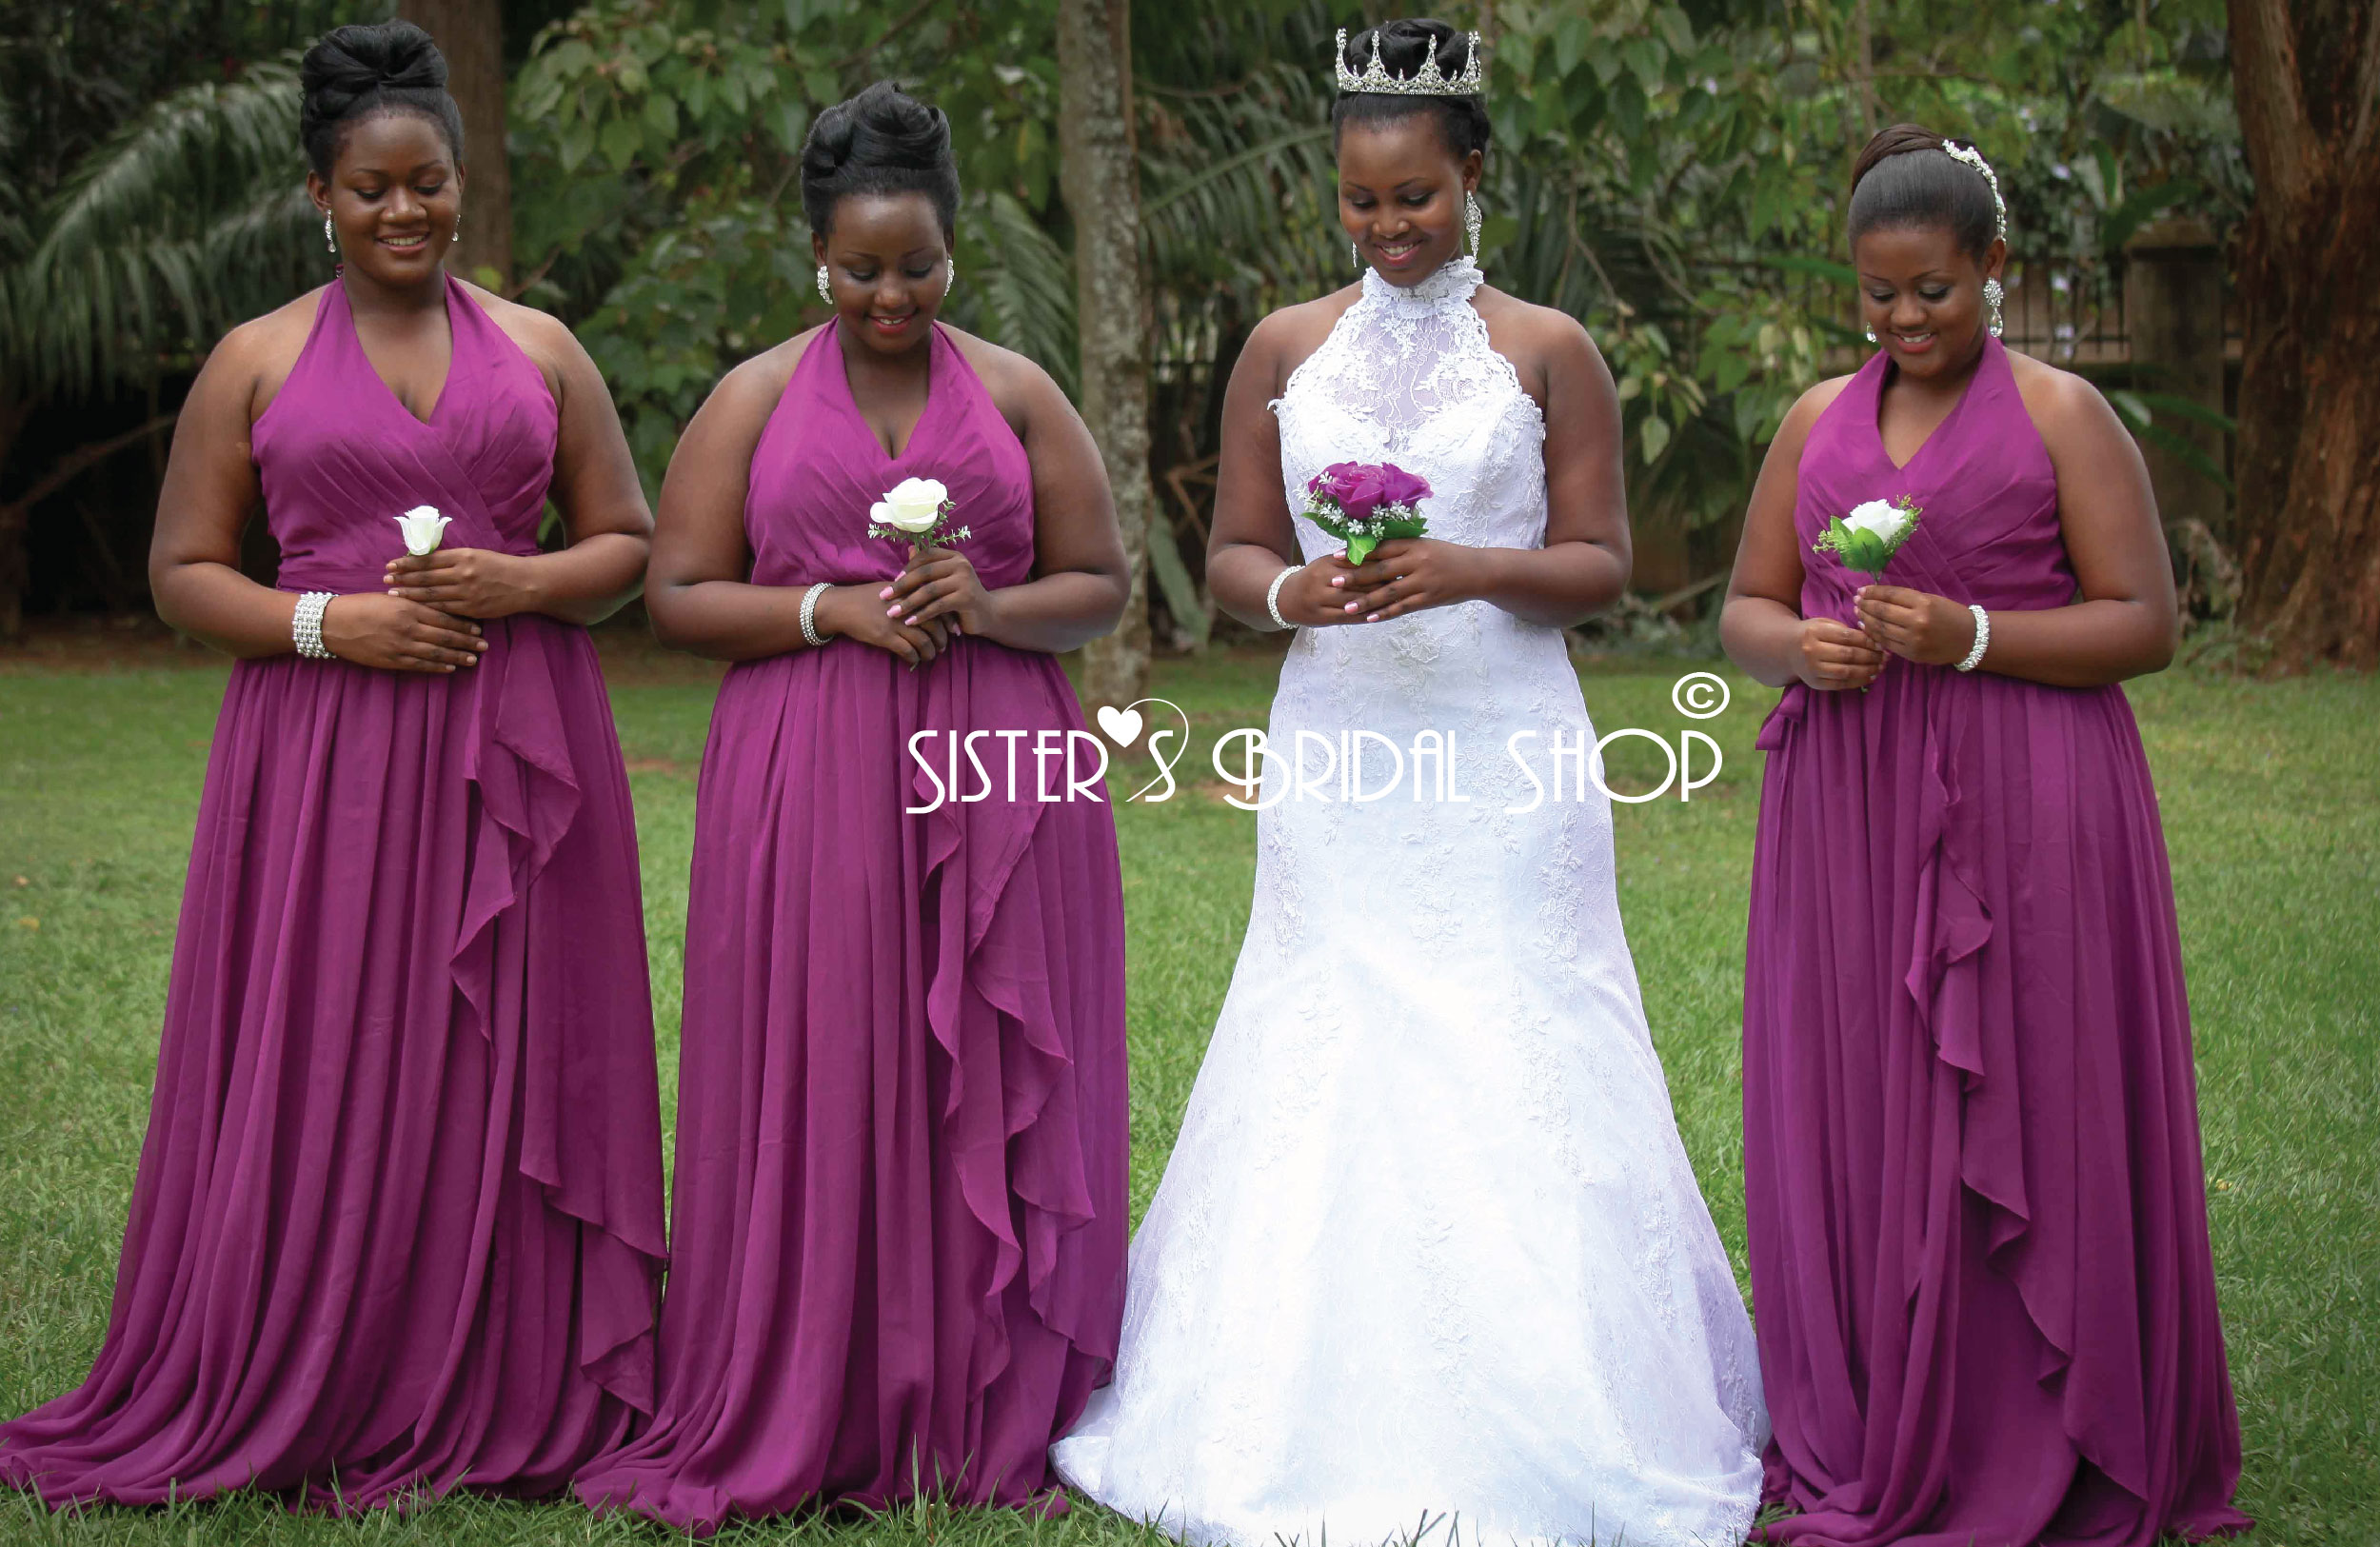 The color purple has been associated with royalty for centuries. What is the dream color for your bridesmaids dresses?